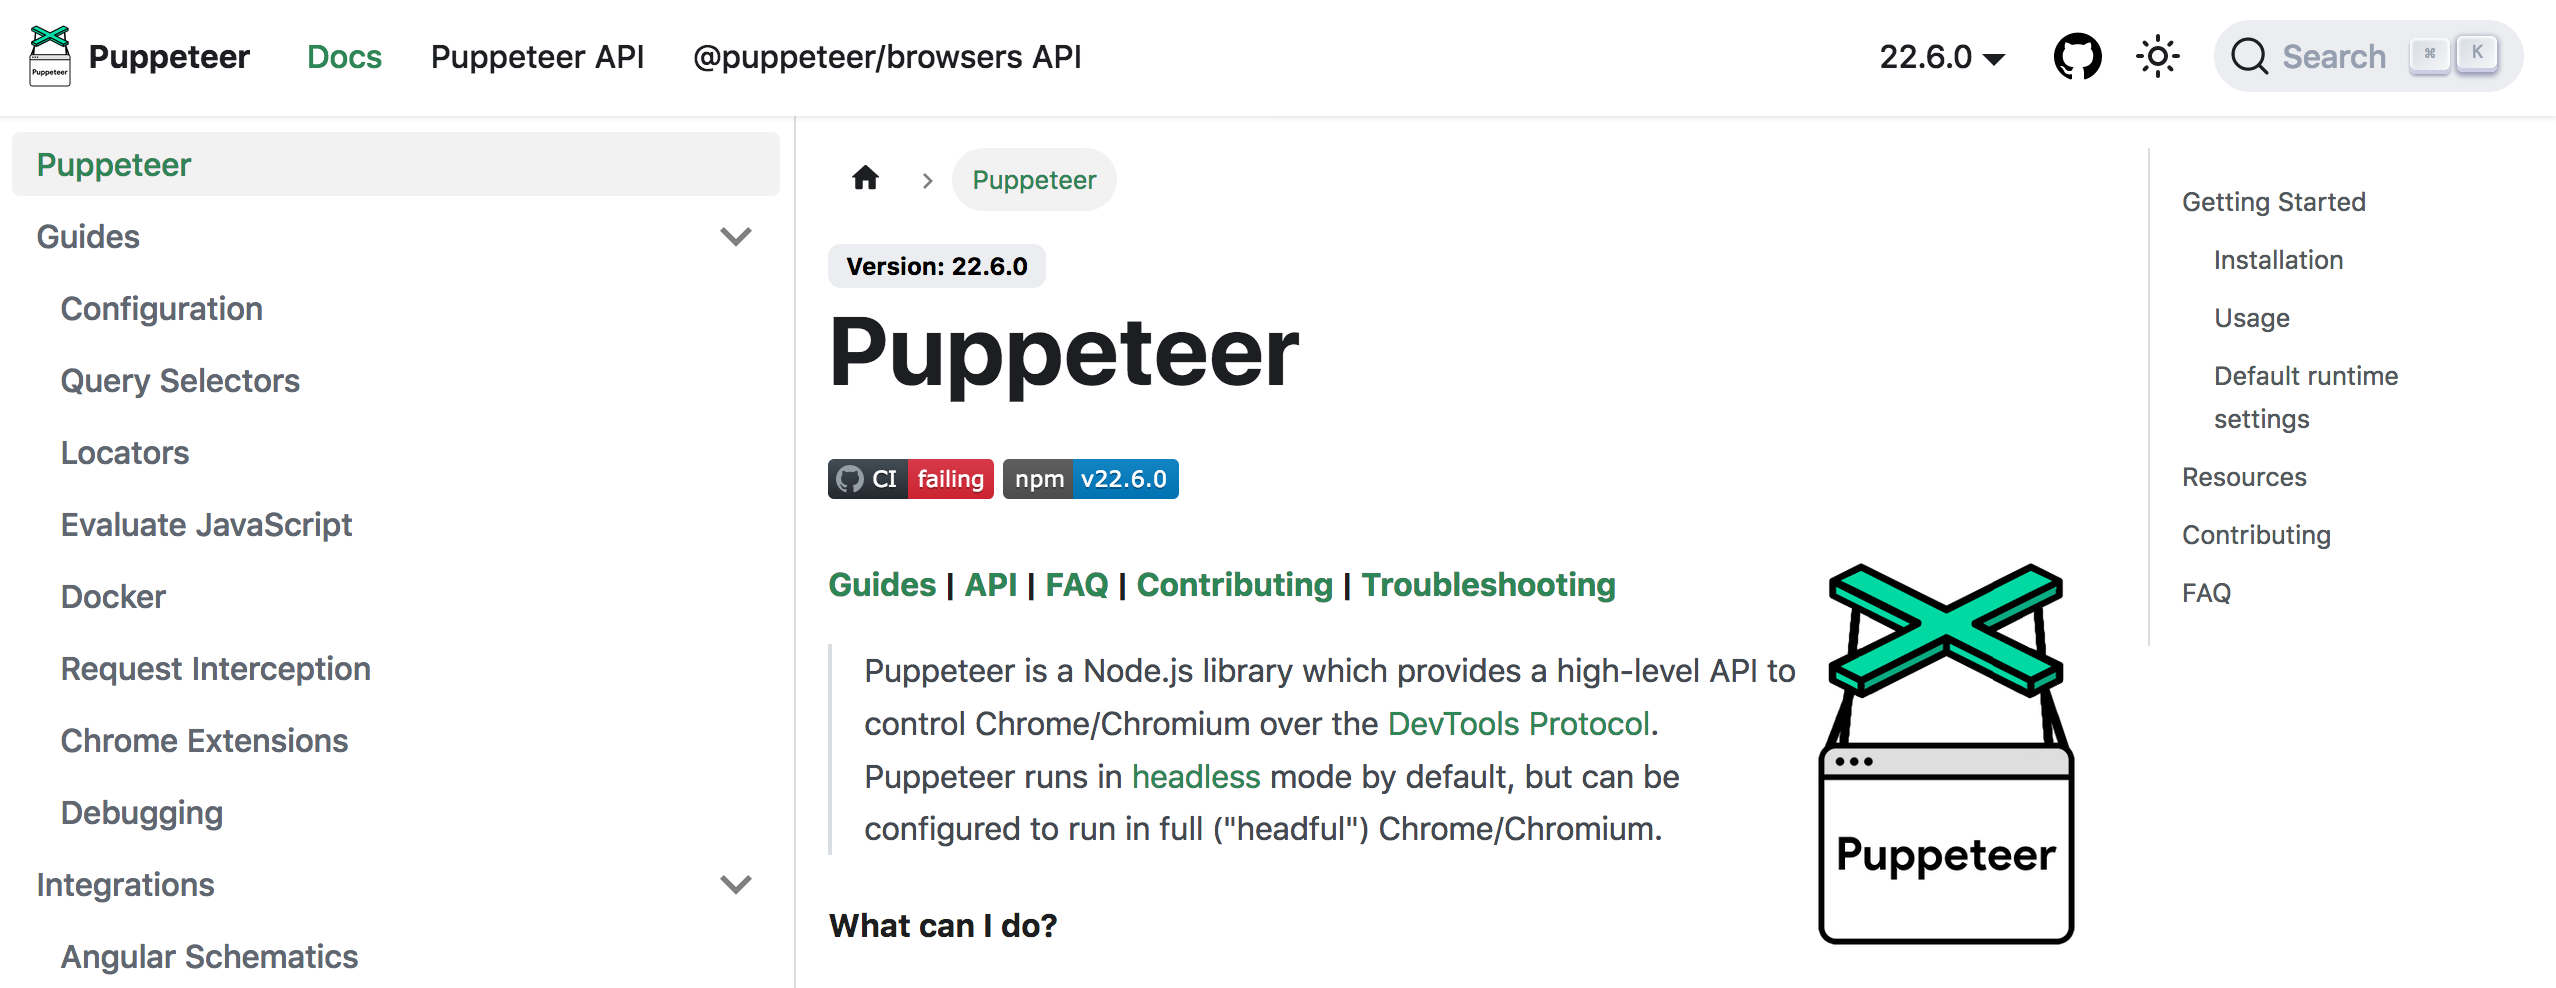 puppeteer - automation test tool - itviec blog